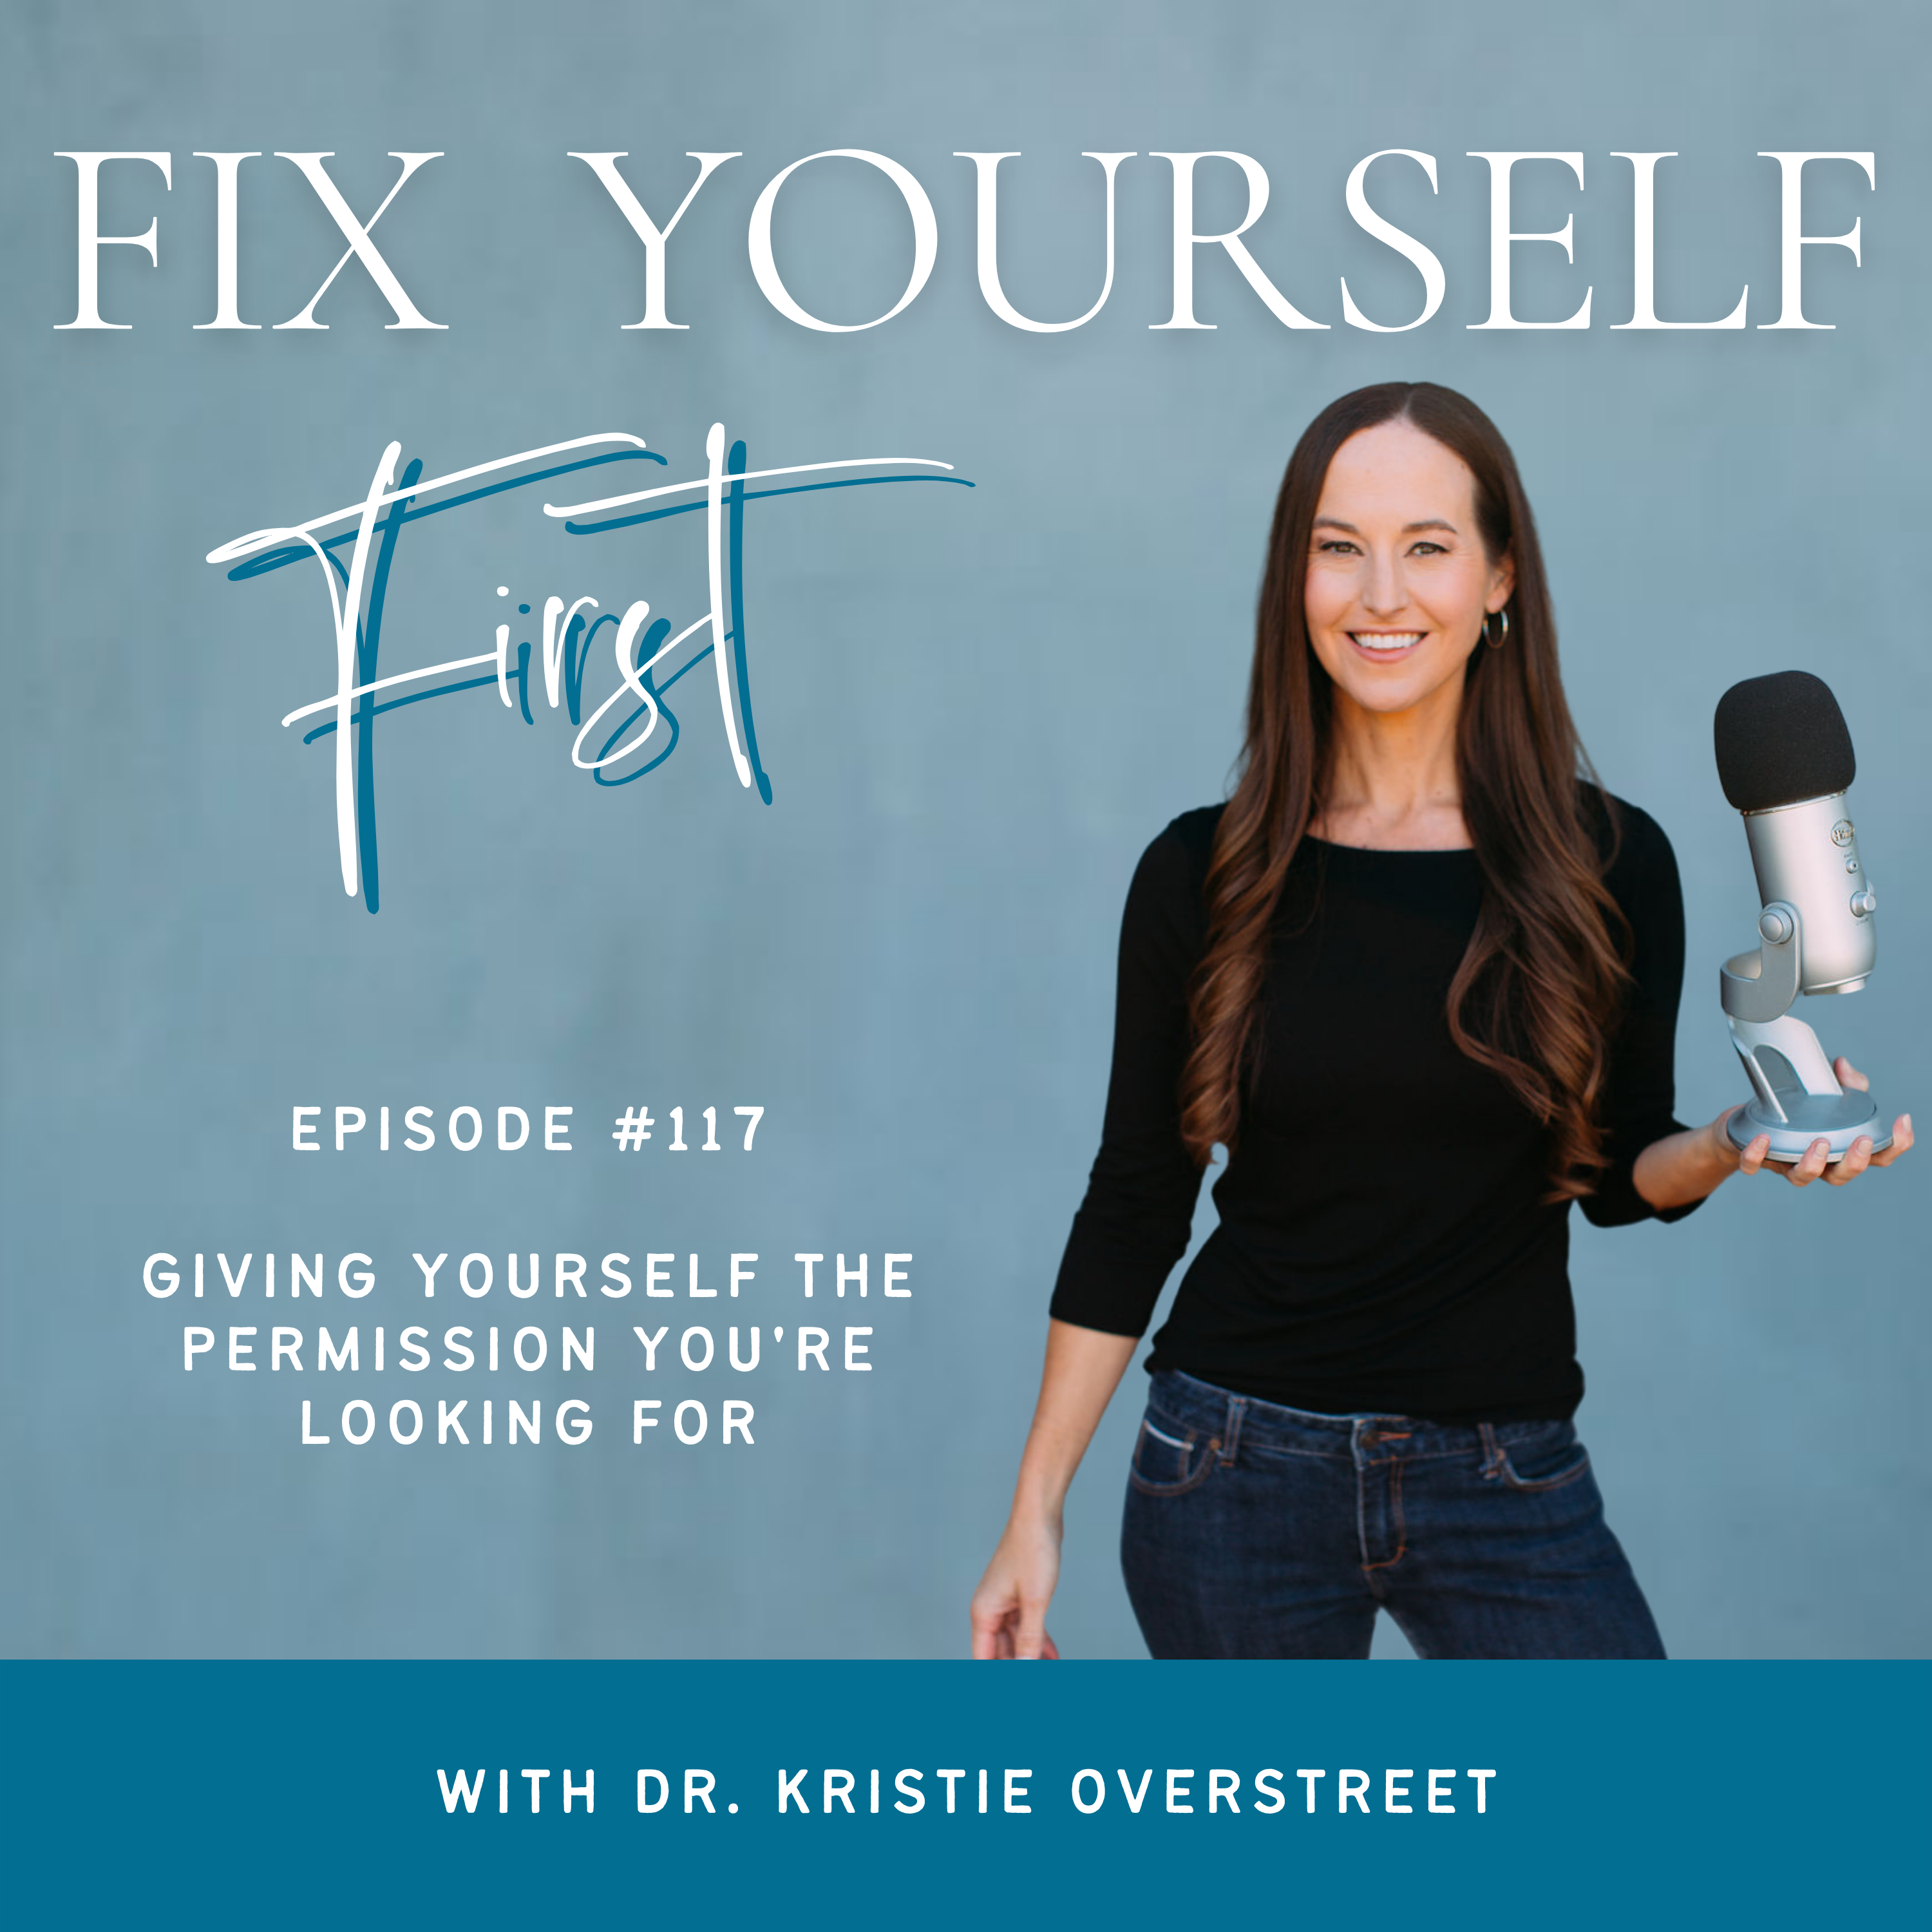 Fix Yourself First Episode 117 Giving Yourself the Permission You're Looking For